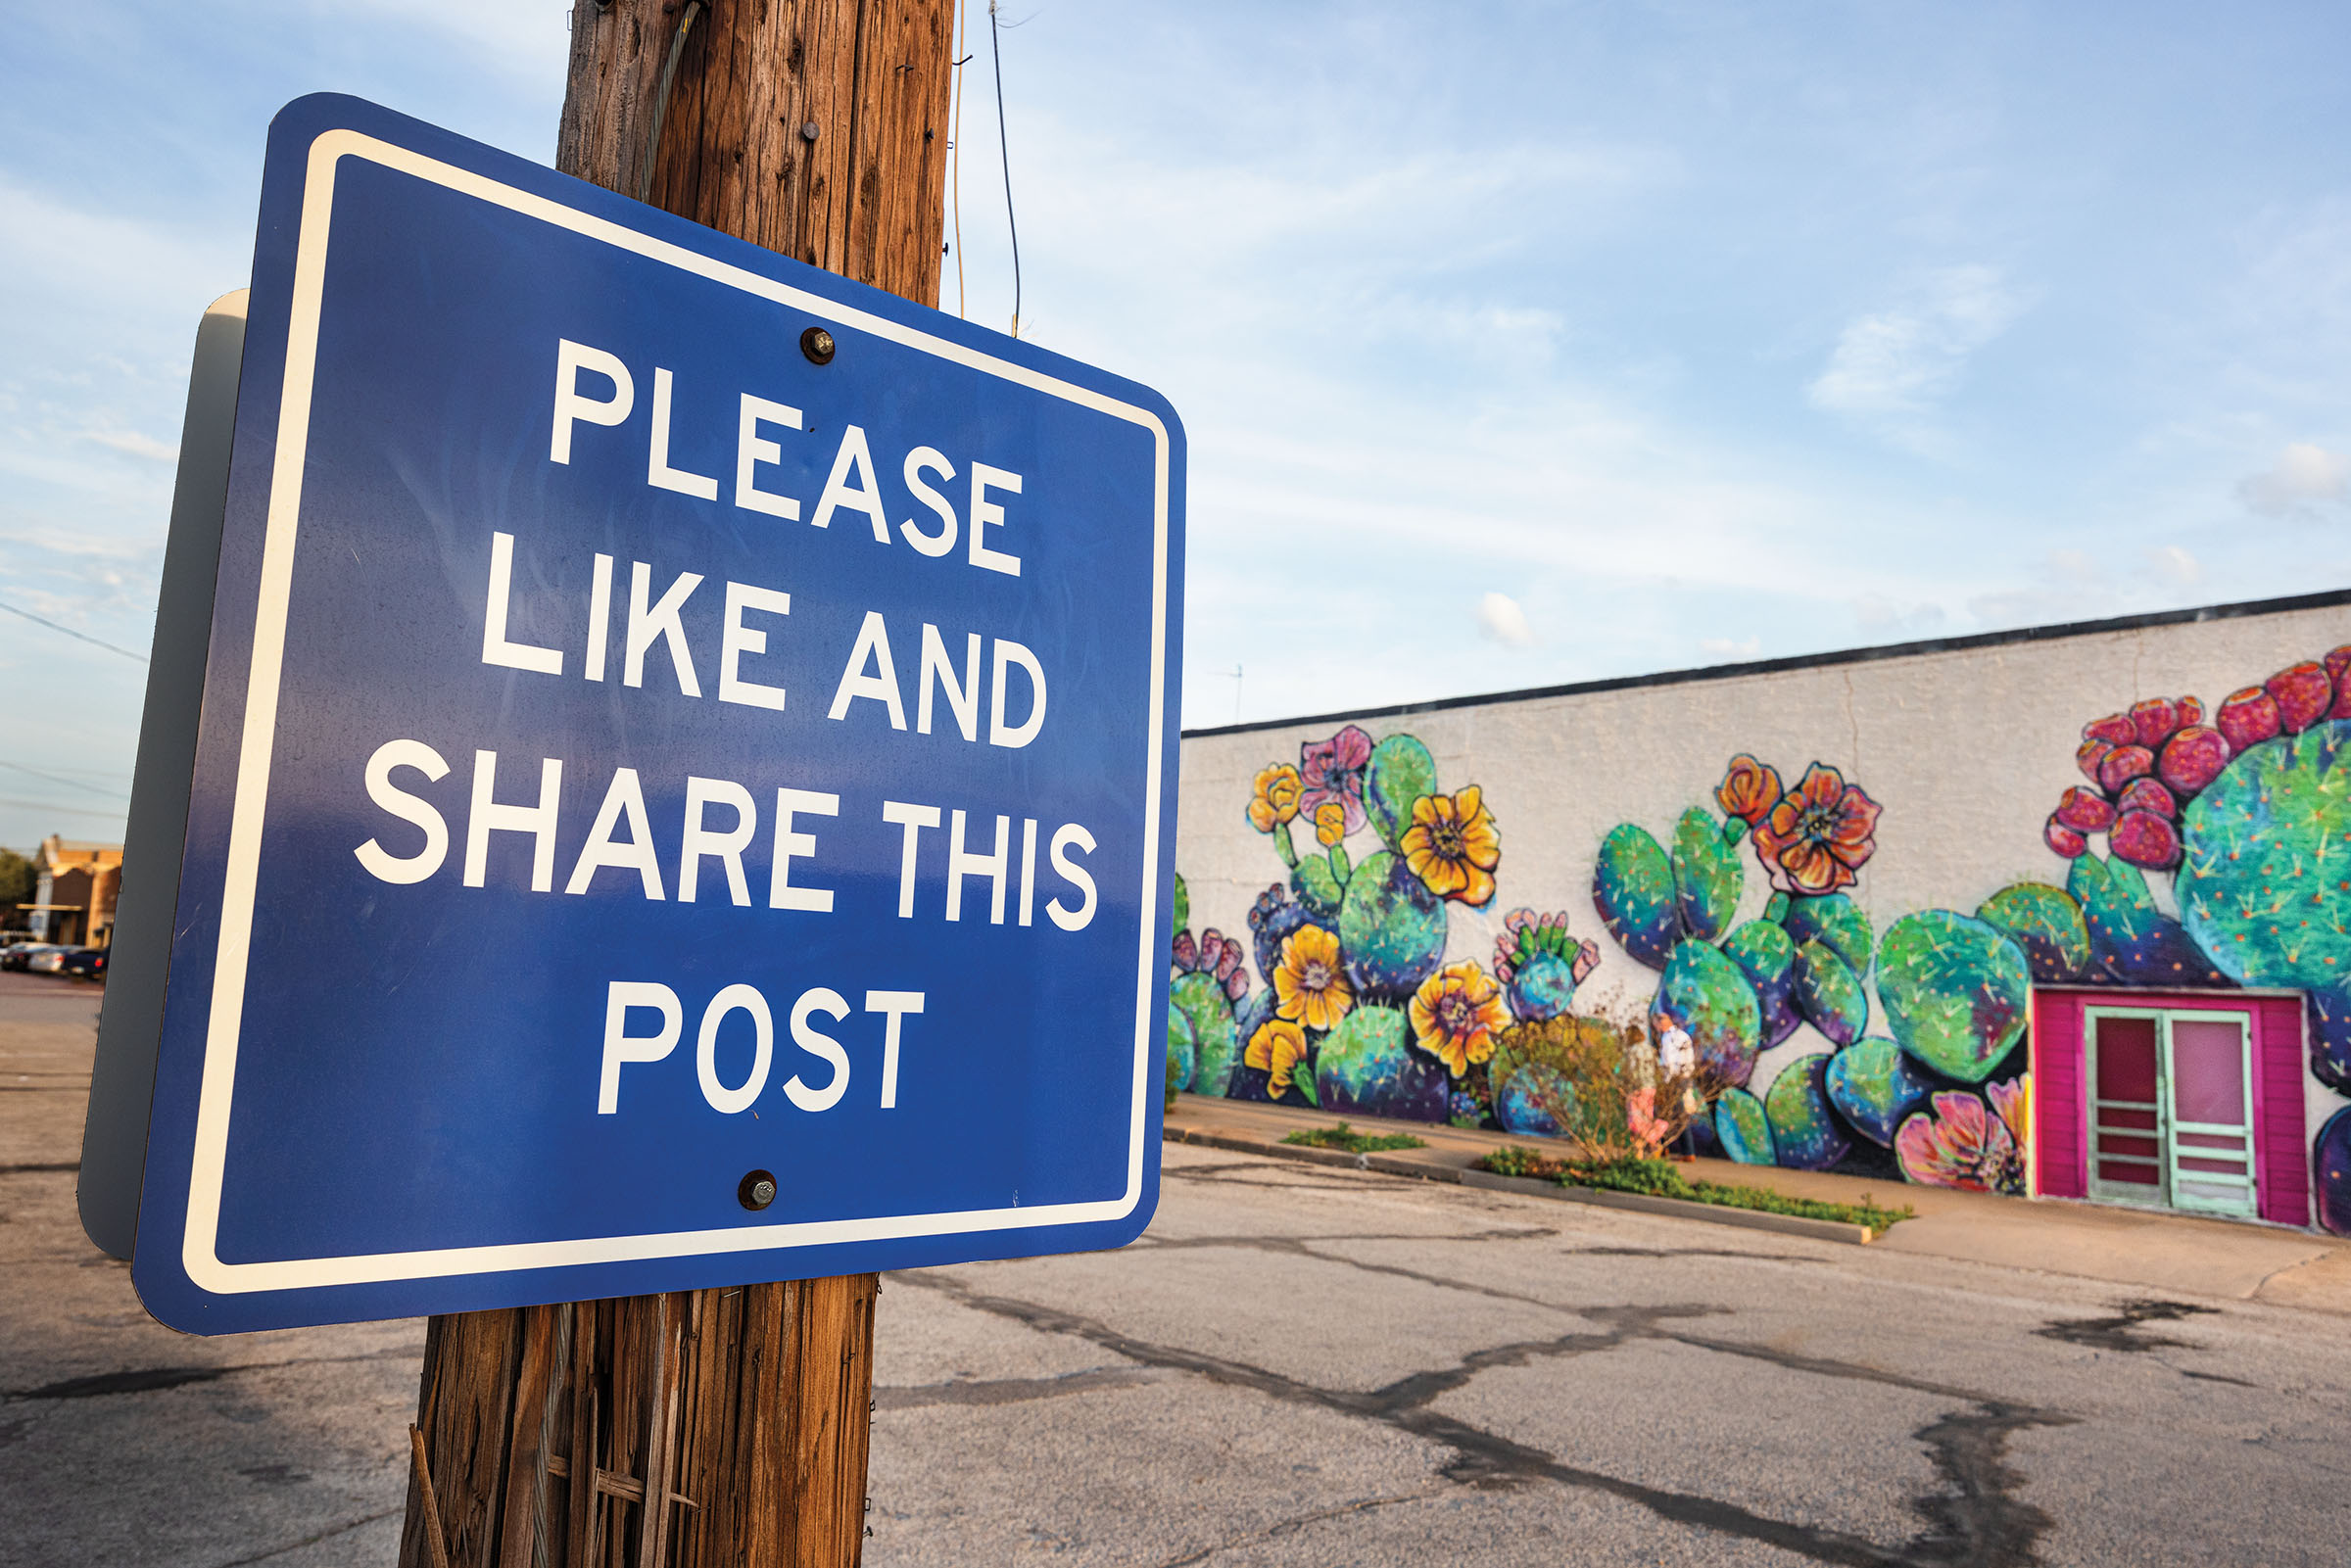 A blue sign reading "Please like and share this post" in front of a brightly colored cactus mural